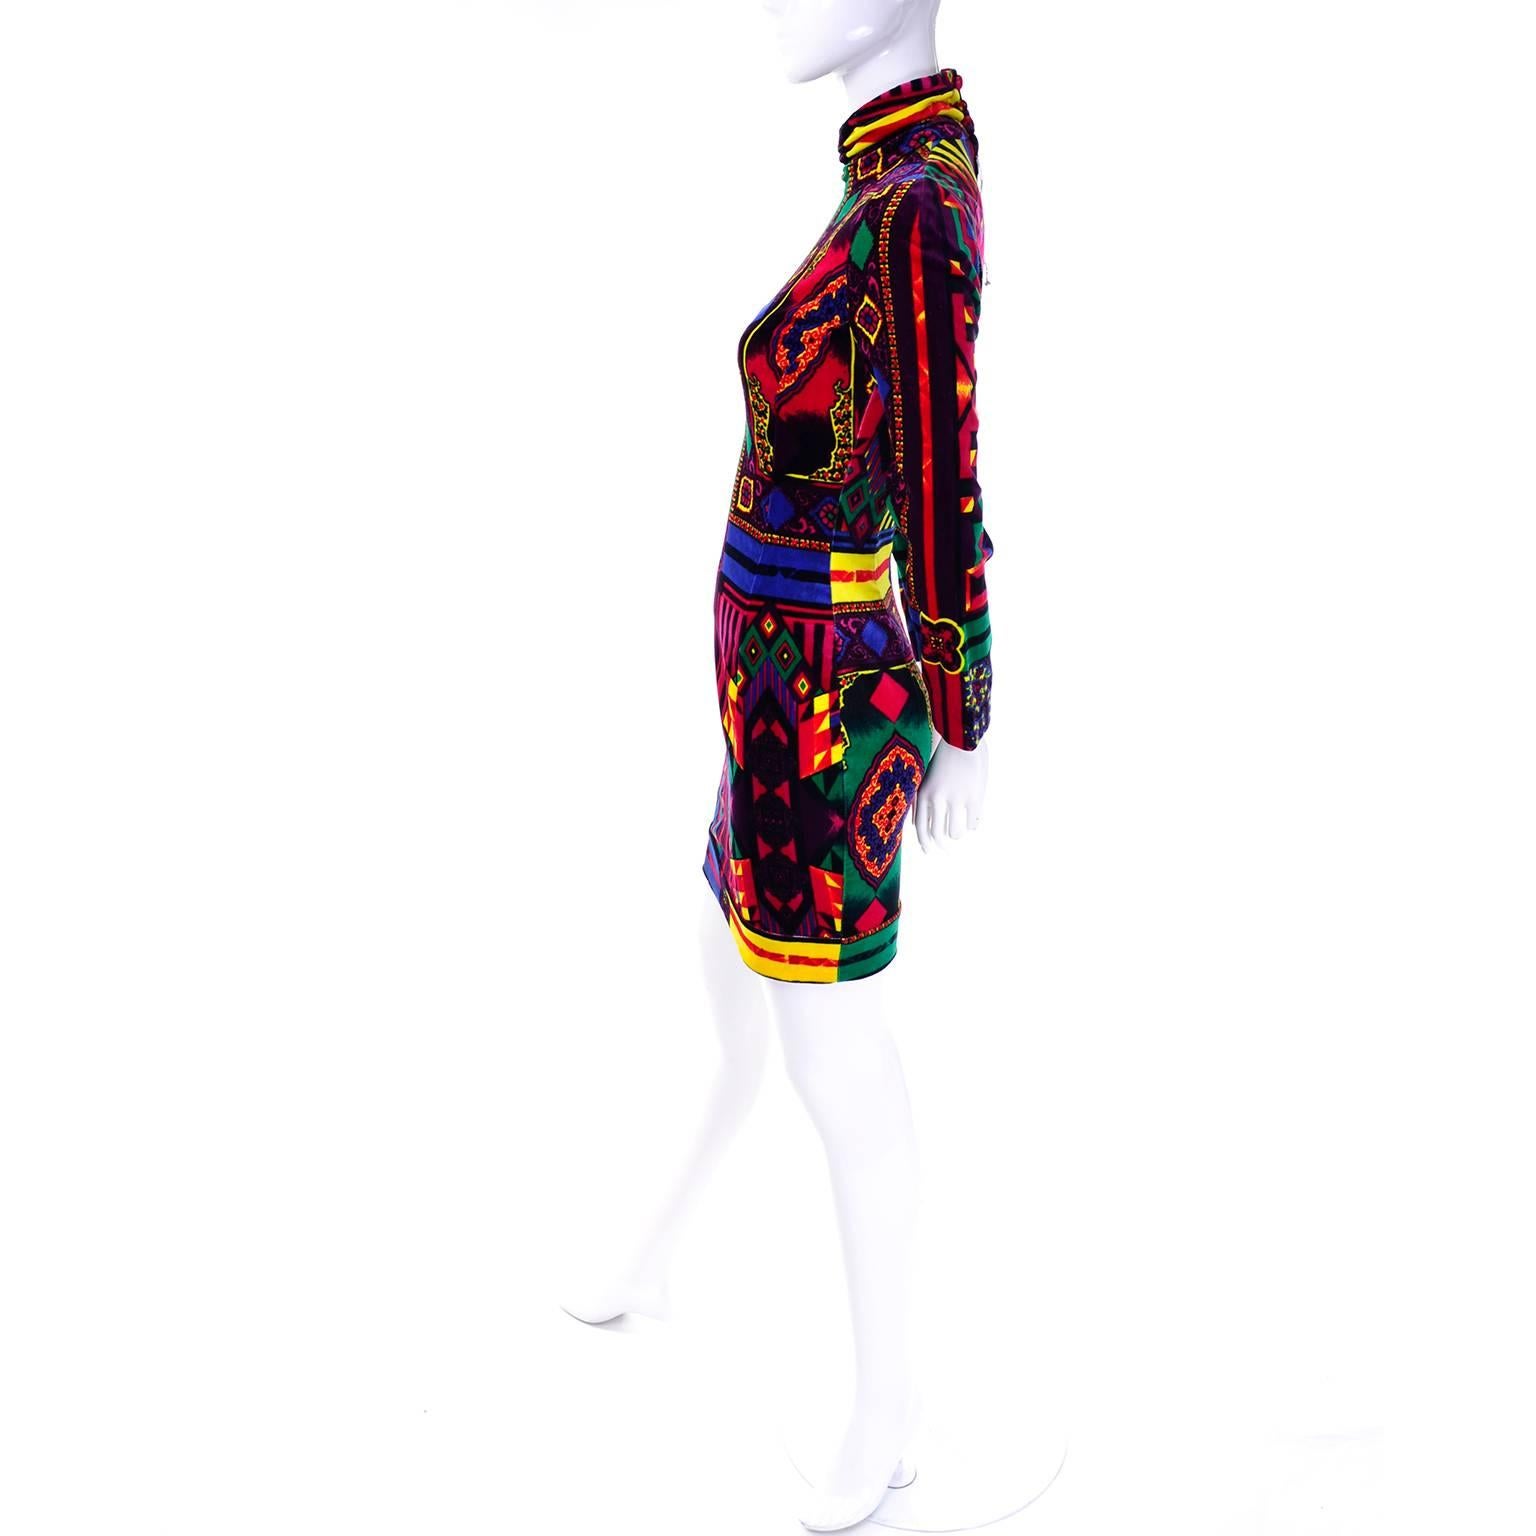 Women's New 1990s Gianni Versace Vintage Dress in Bold Abstract Pattern Velvet w/ tag